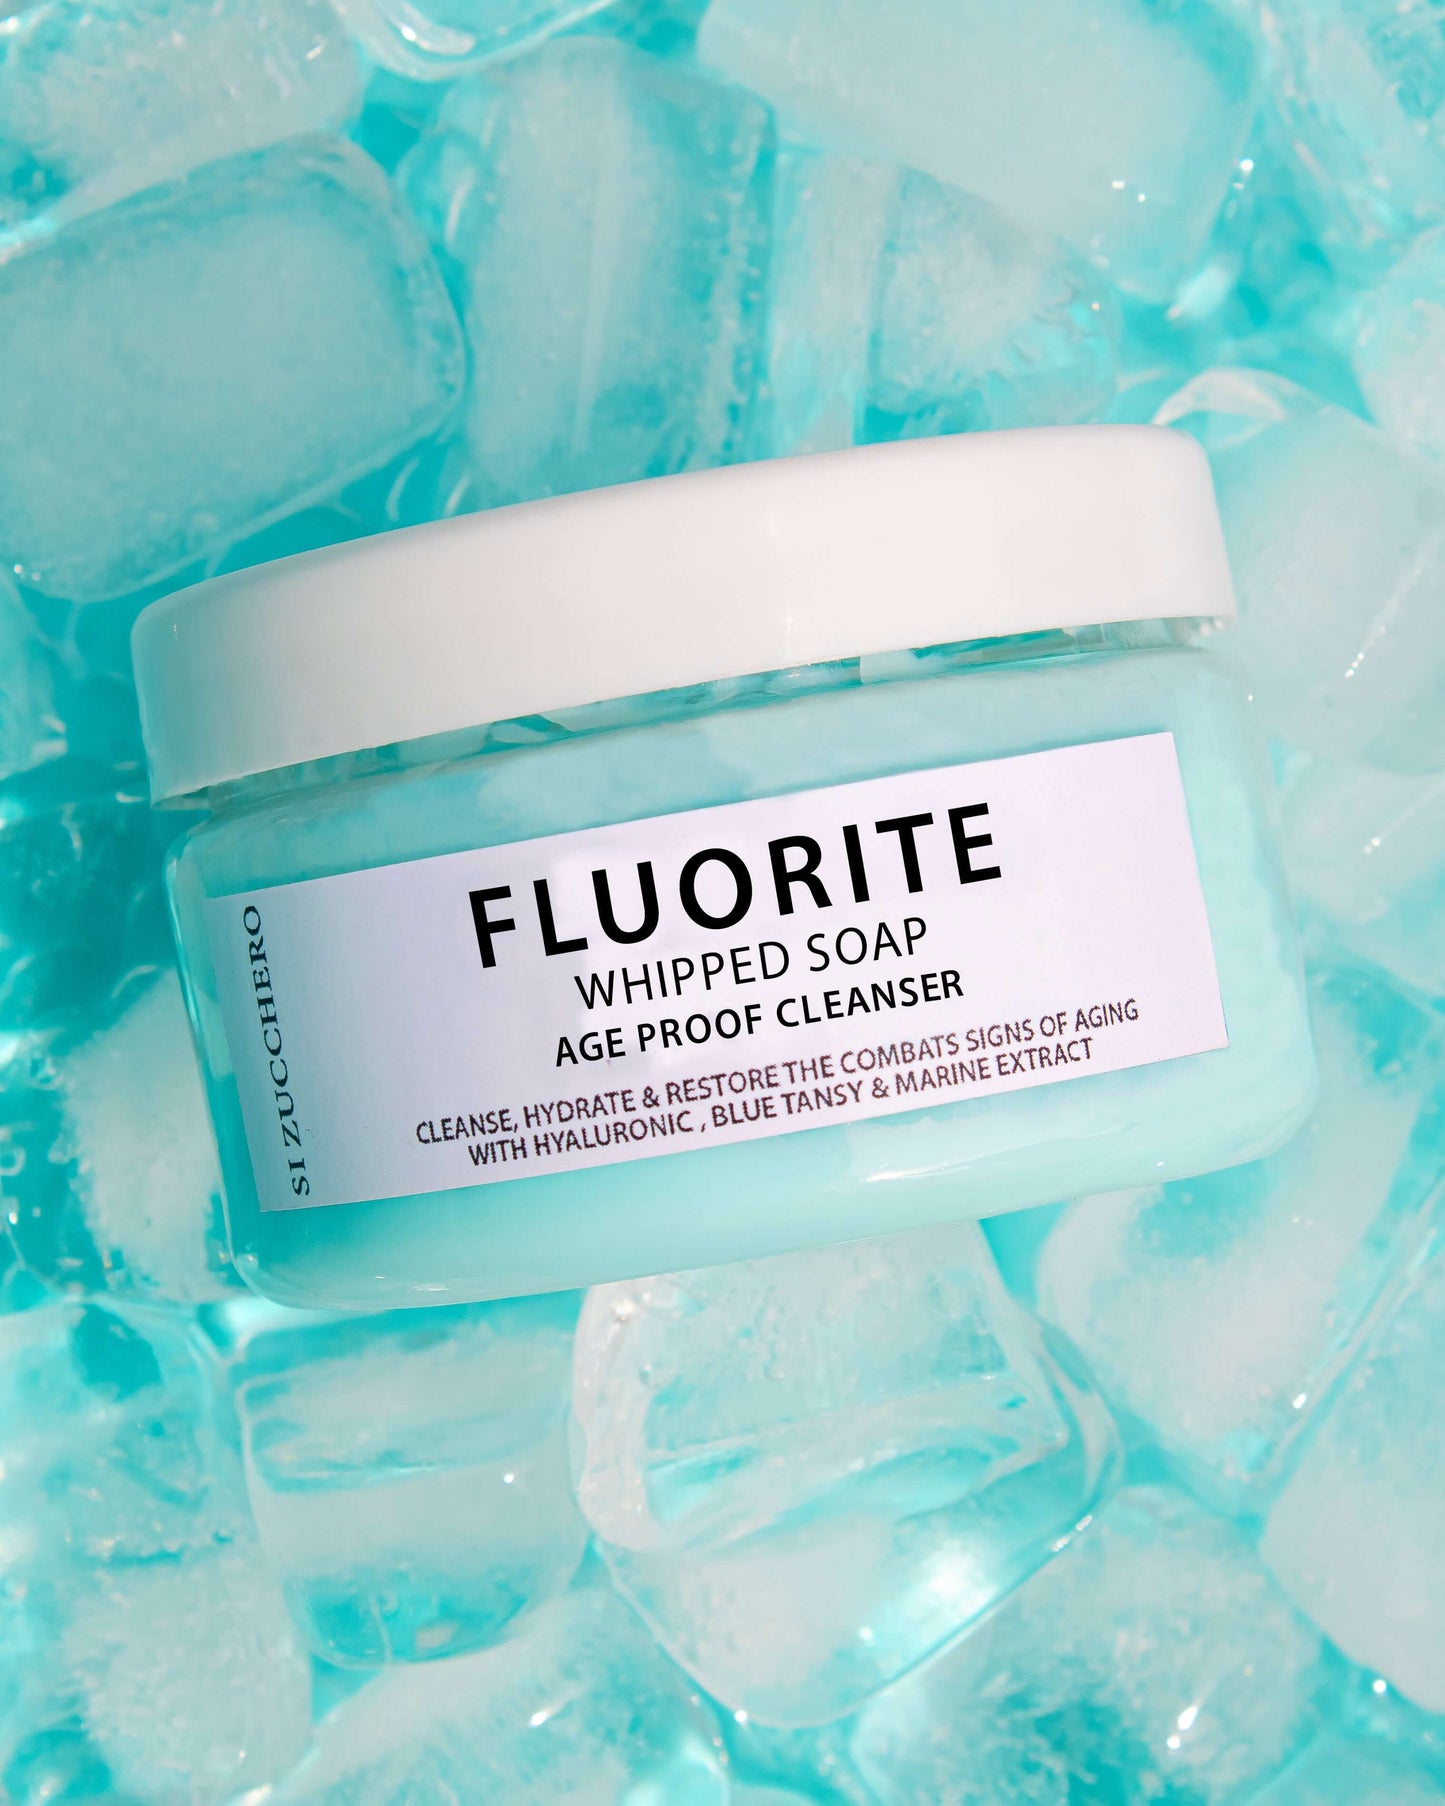 Fluorite Age-Proof Whipped Soap Cleanser